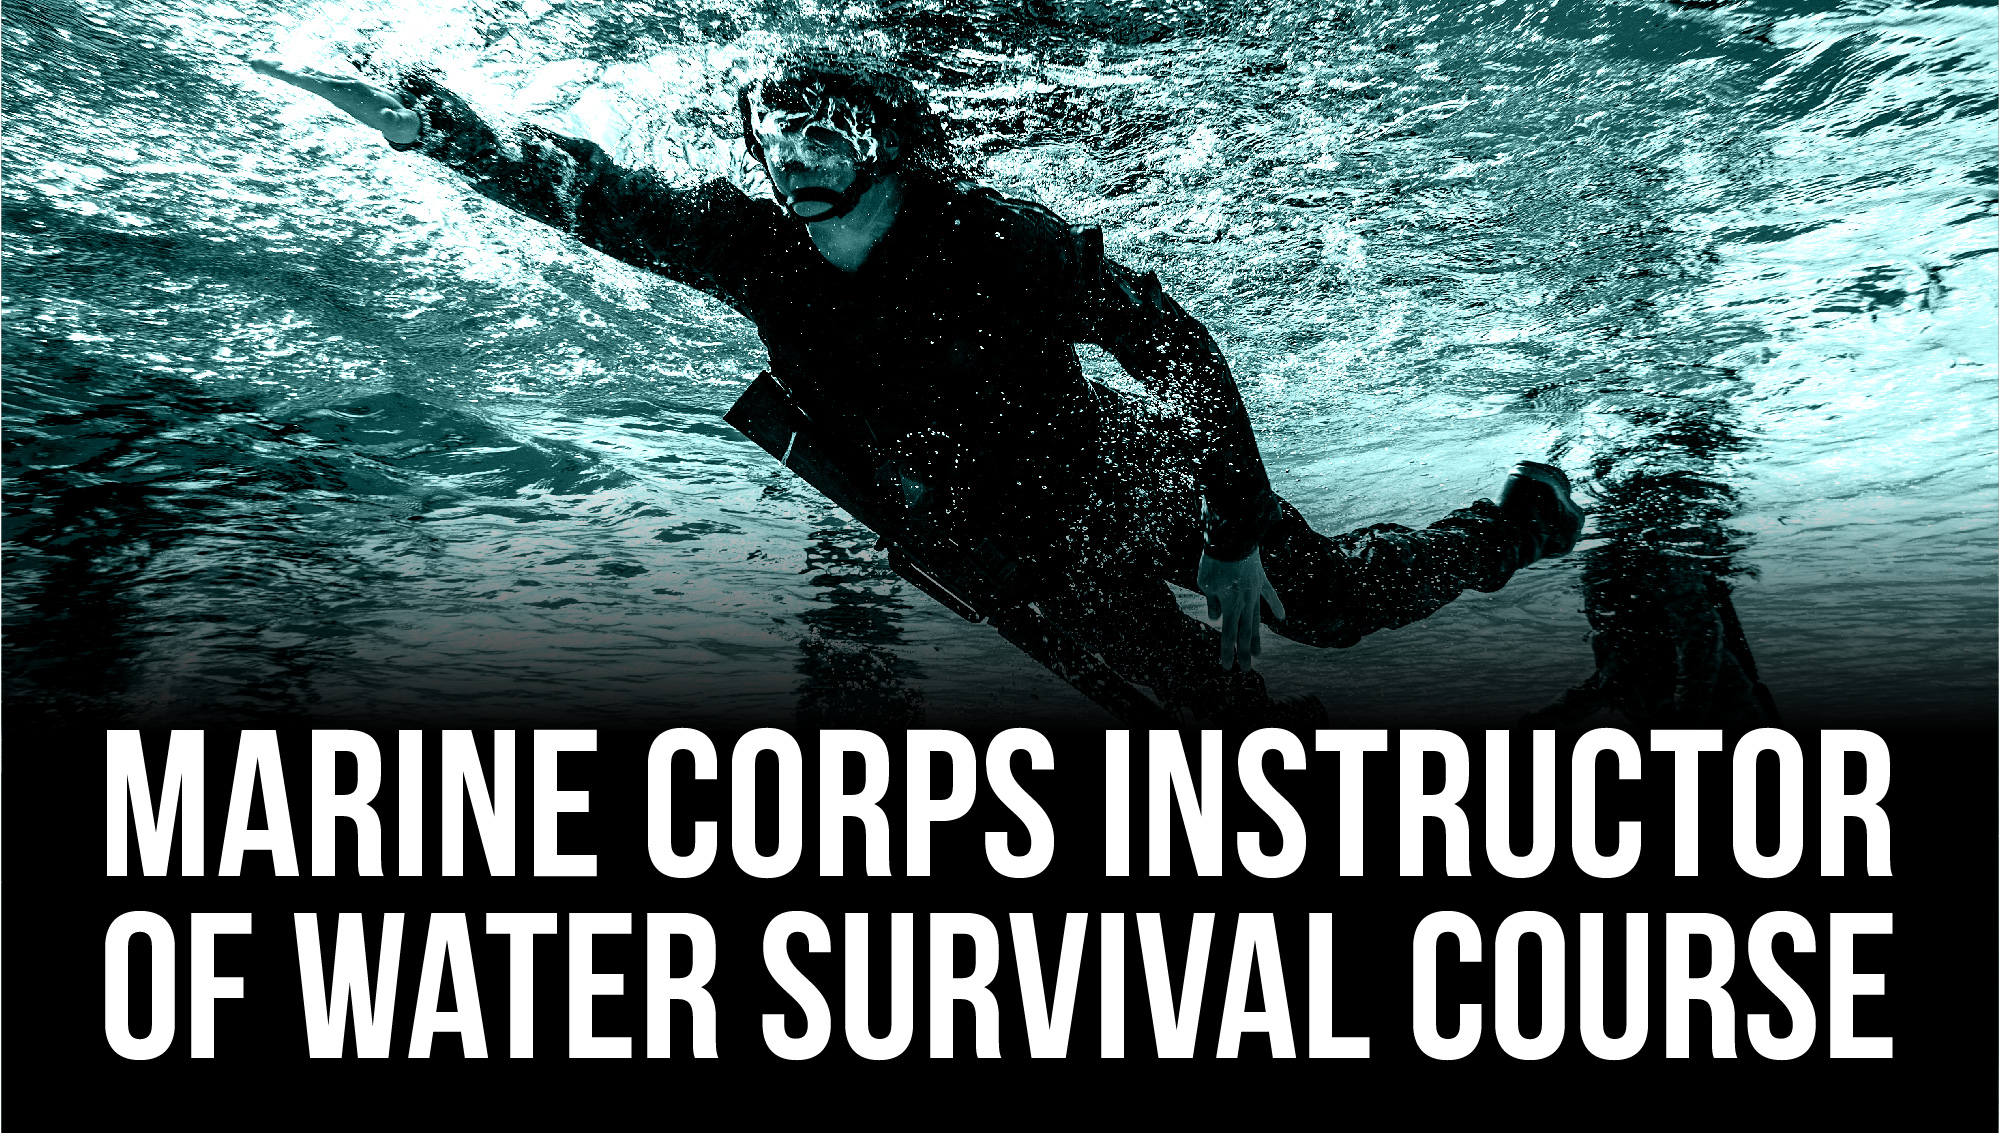 Marine Corps Instructor of Water Survival Course